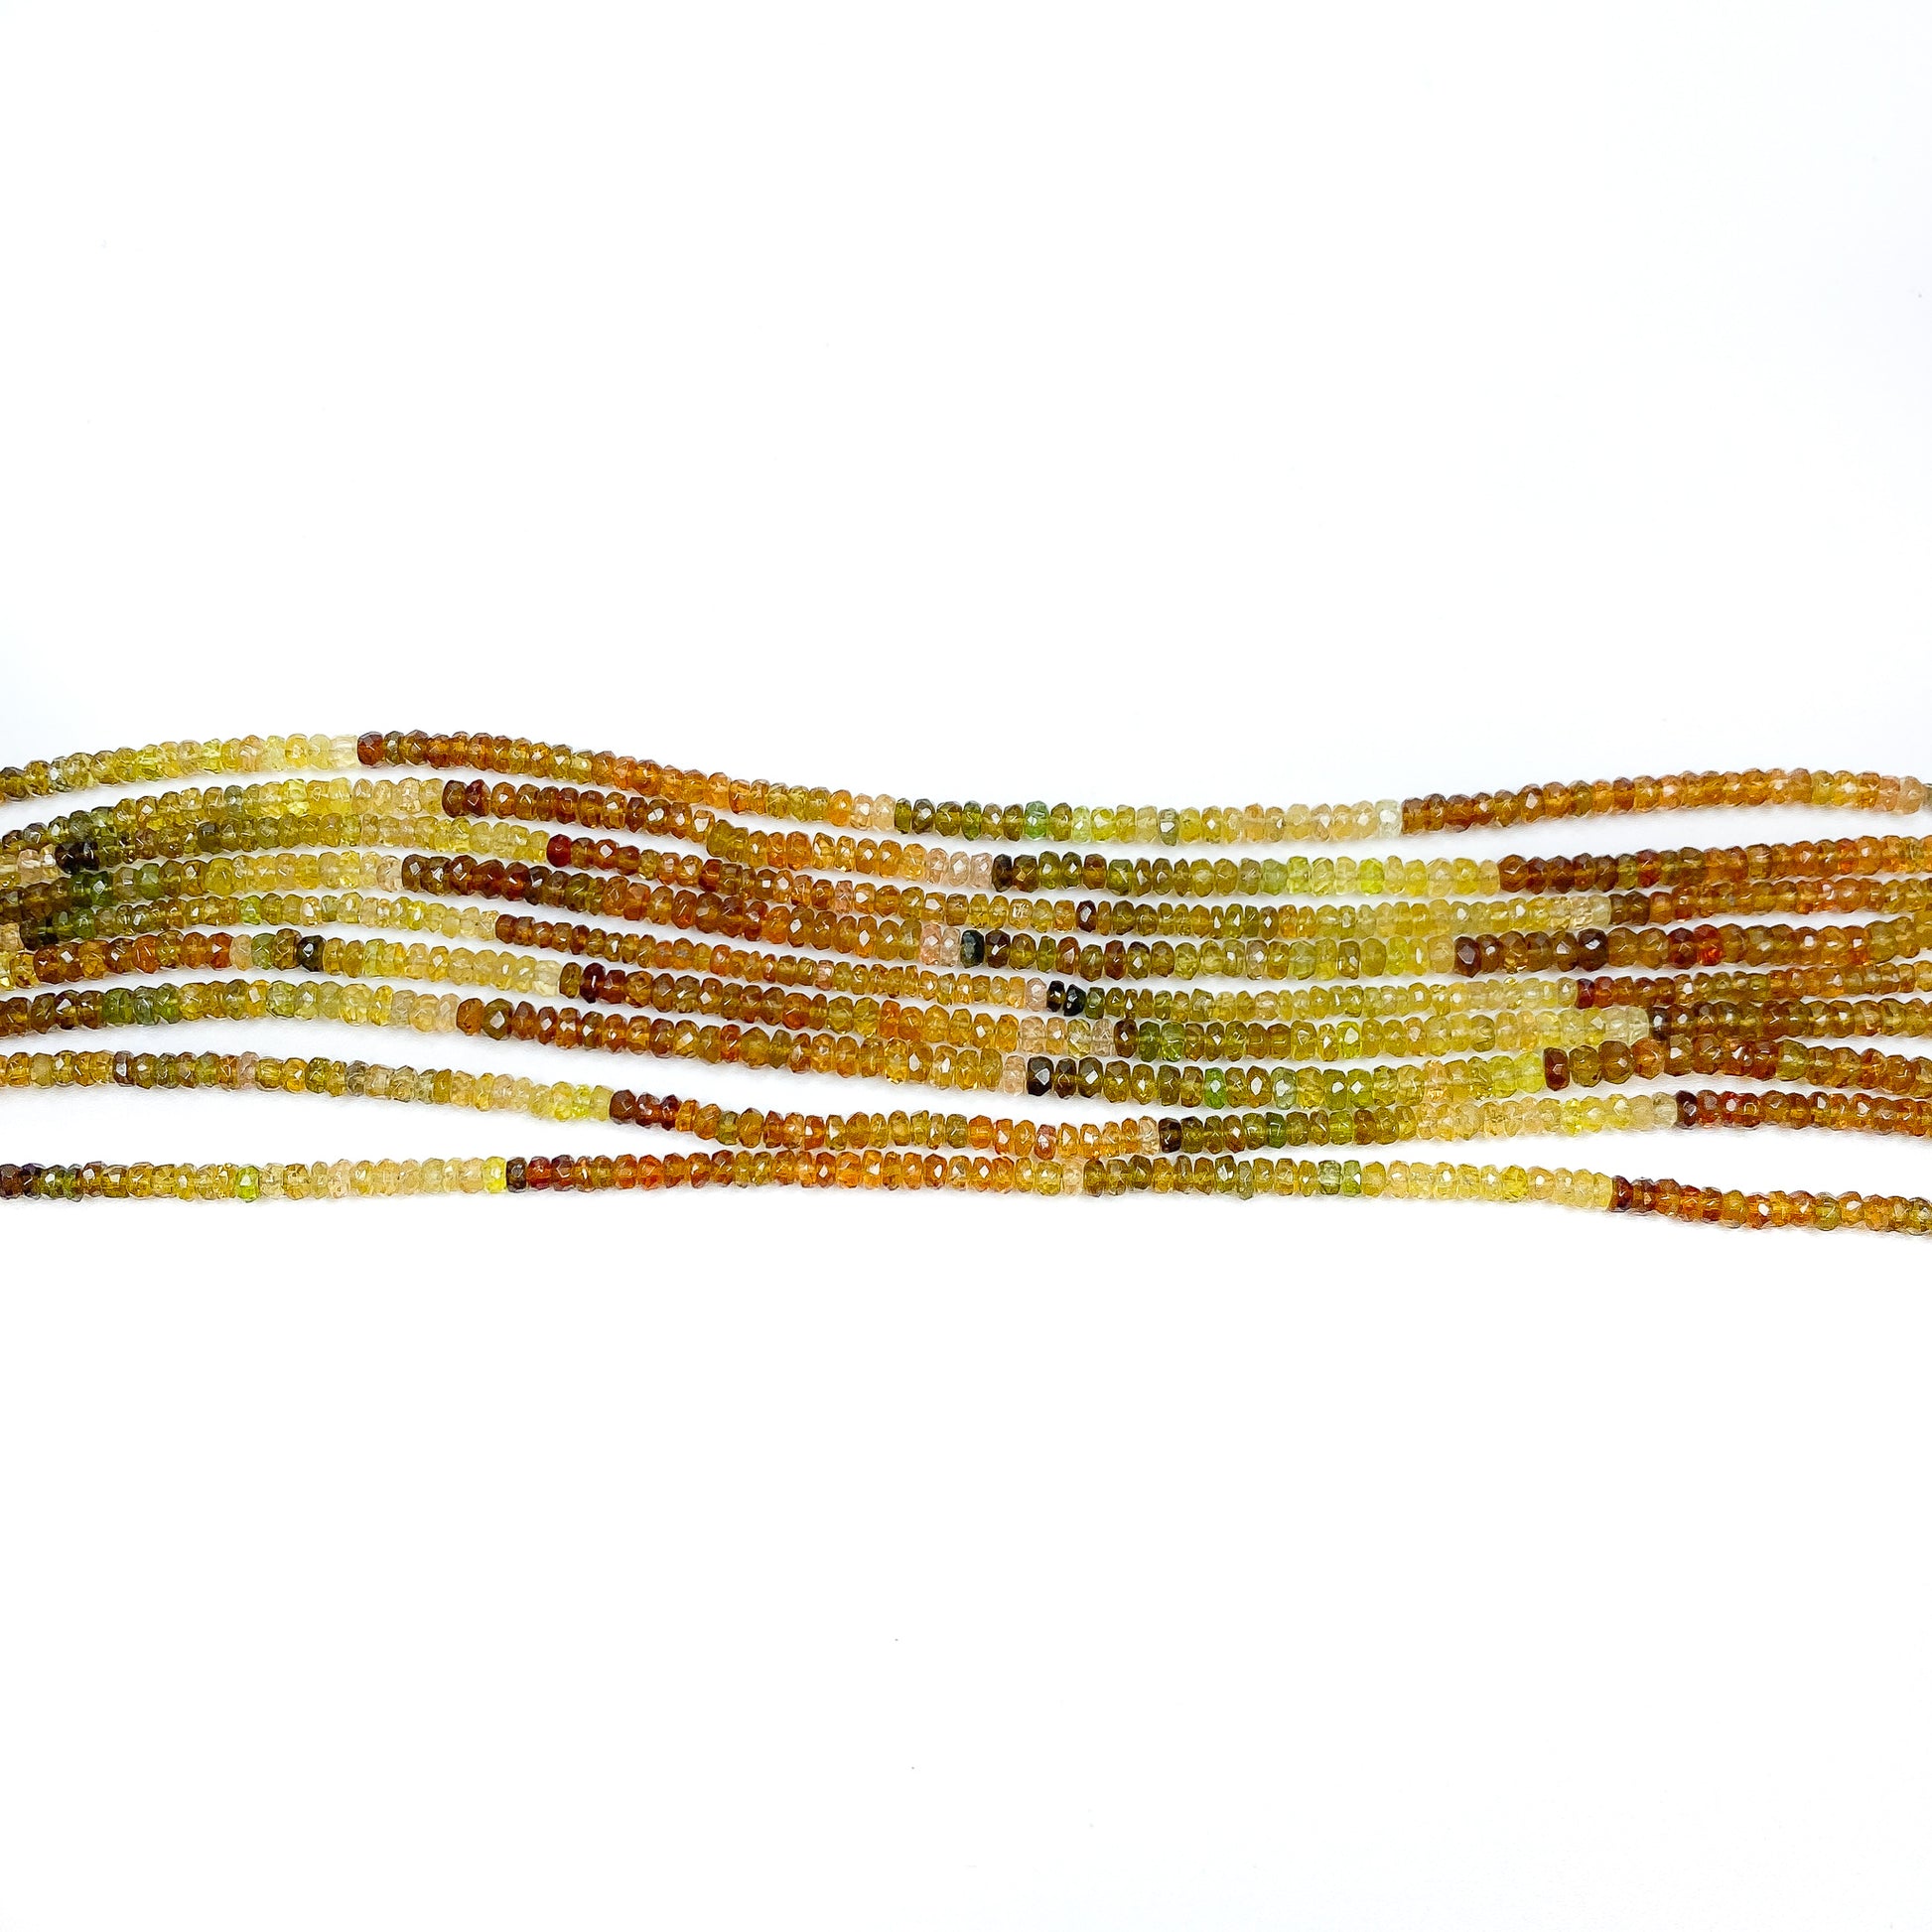 Tourmaline 2x4mm Multicolor Faceted Rondelle Bead - 8" Strand